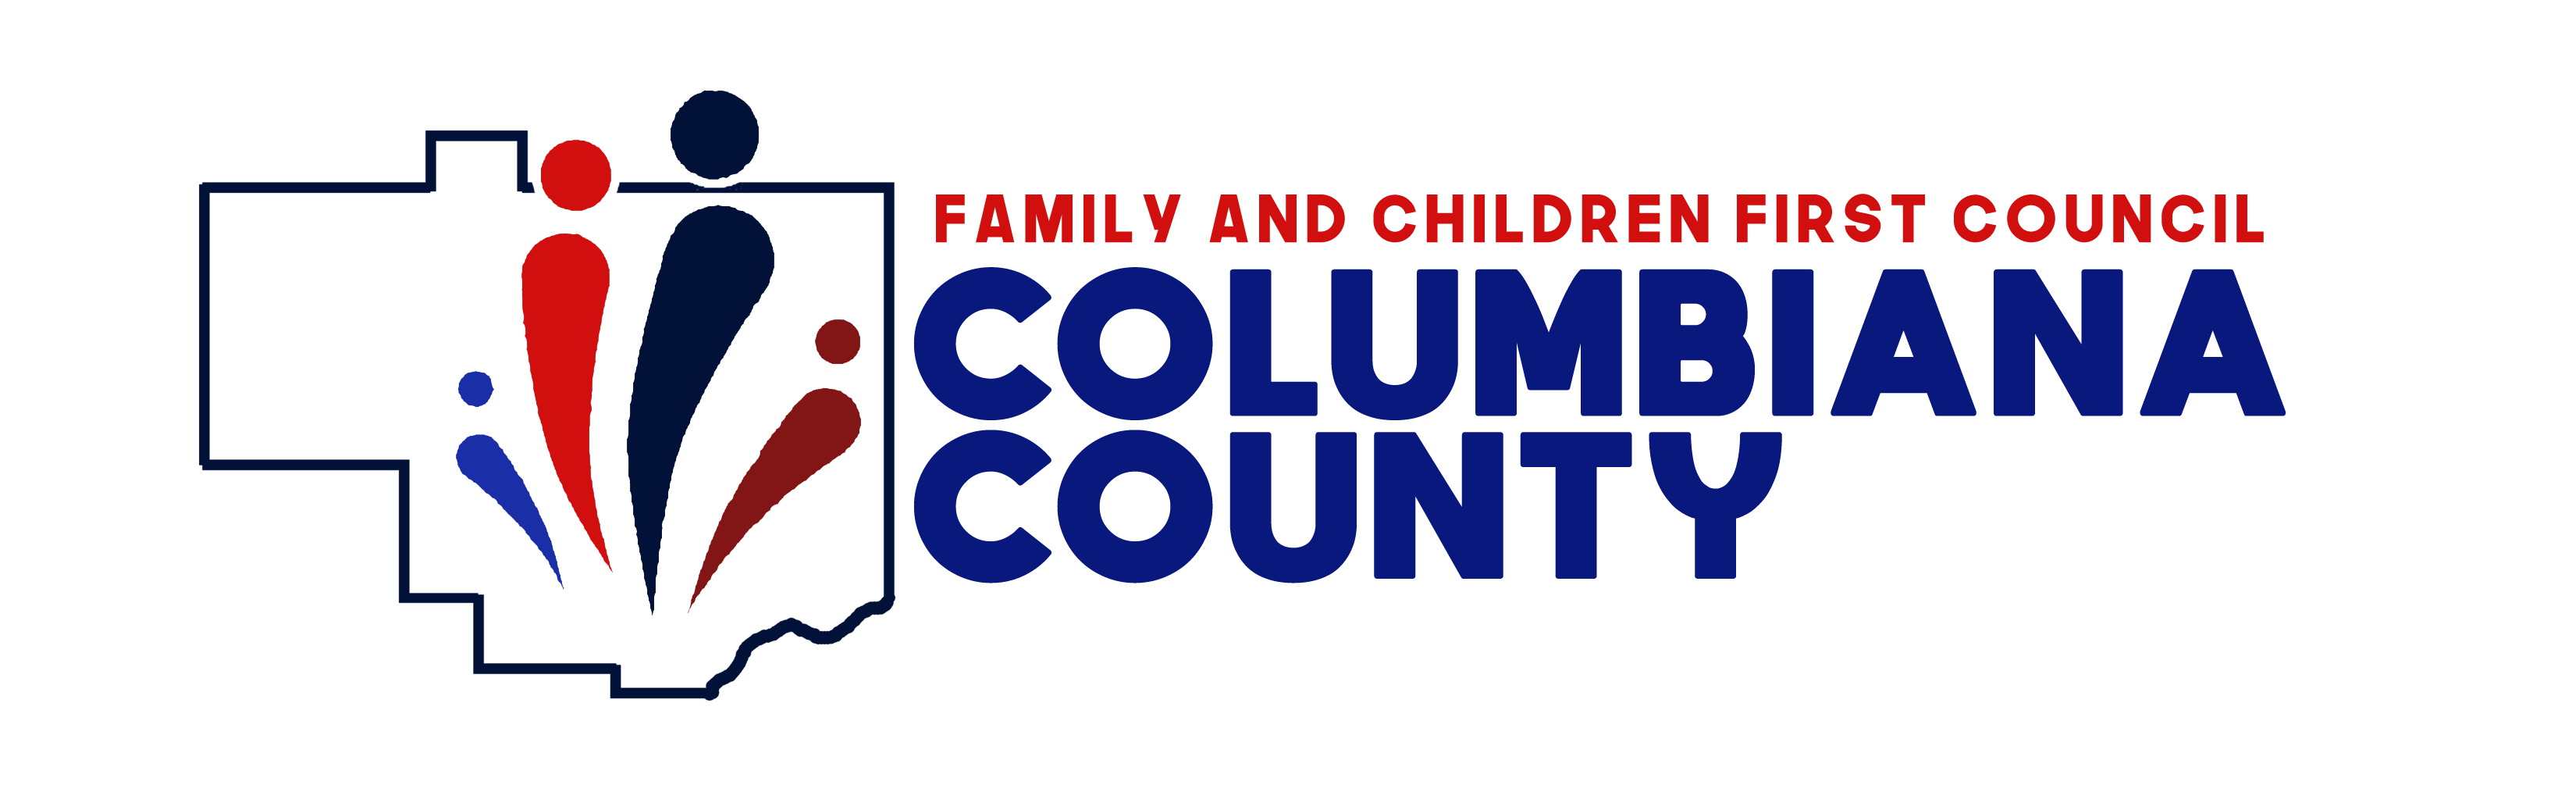 family and children first council